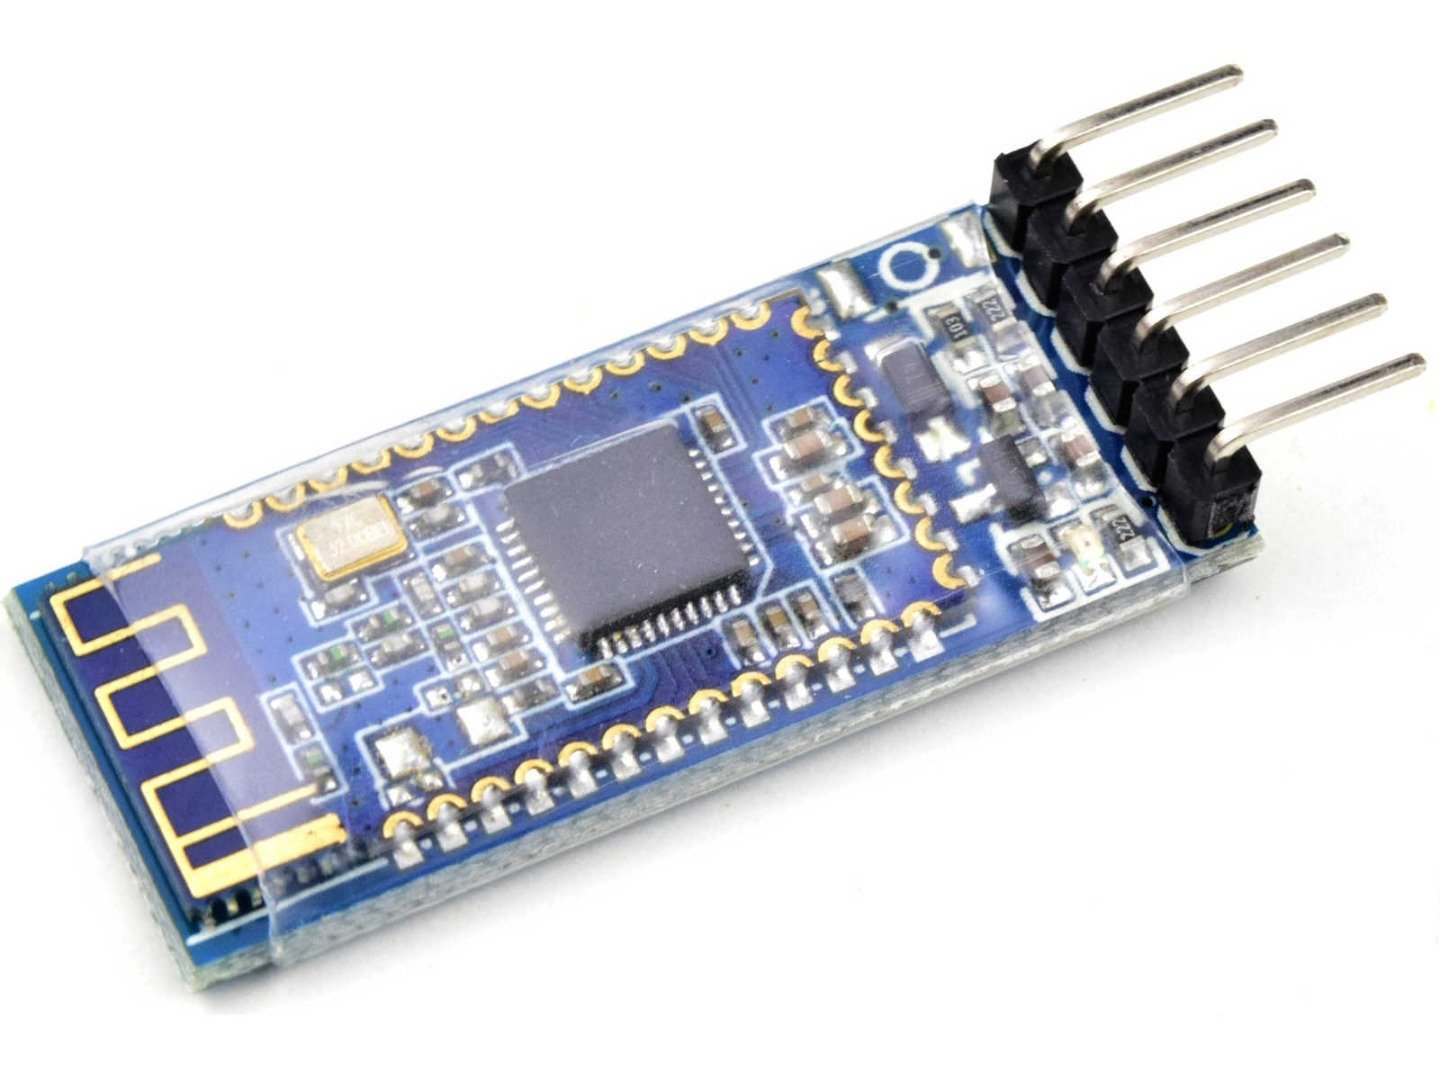 HM-10 Bluetooth 4.0 BLE Module with TI CC2541 chipset 9